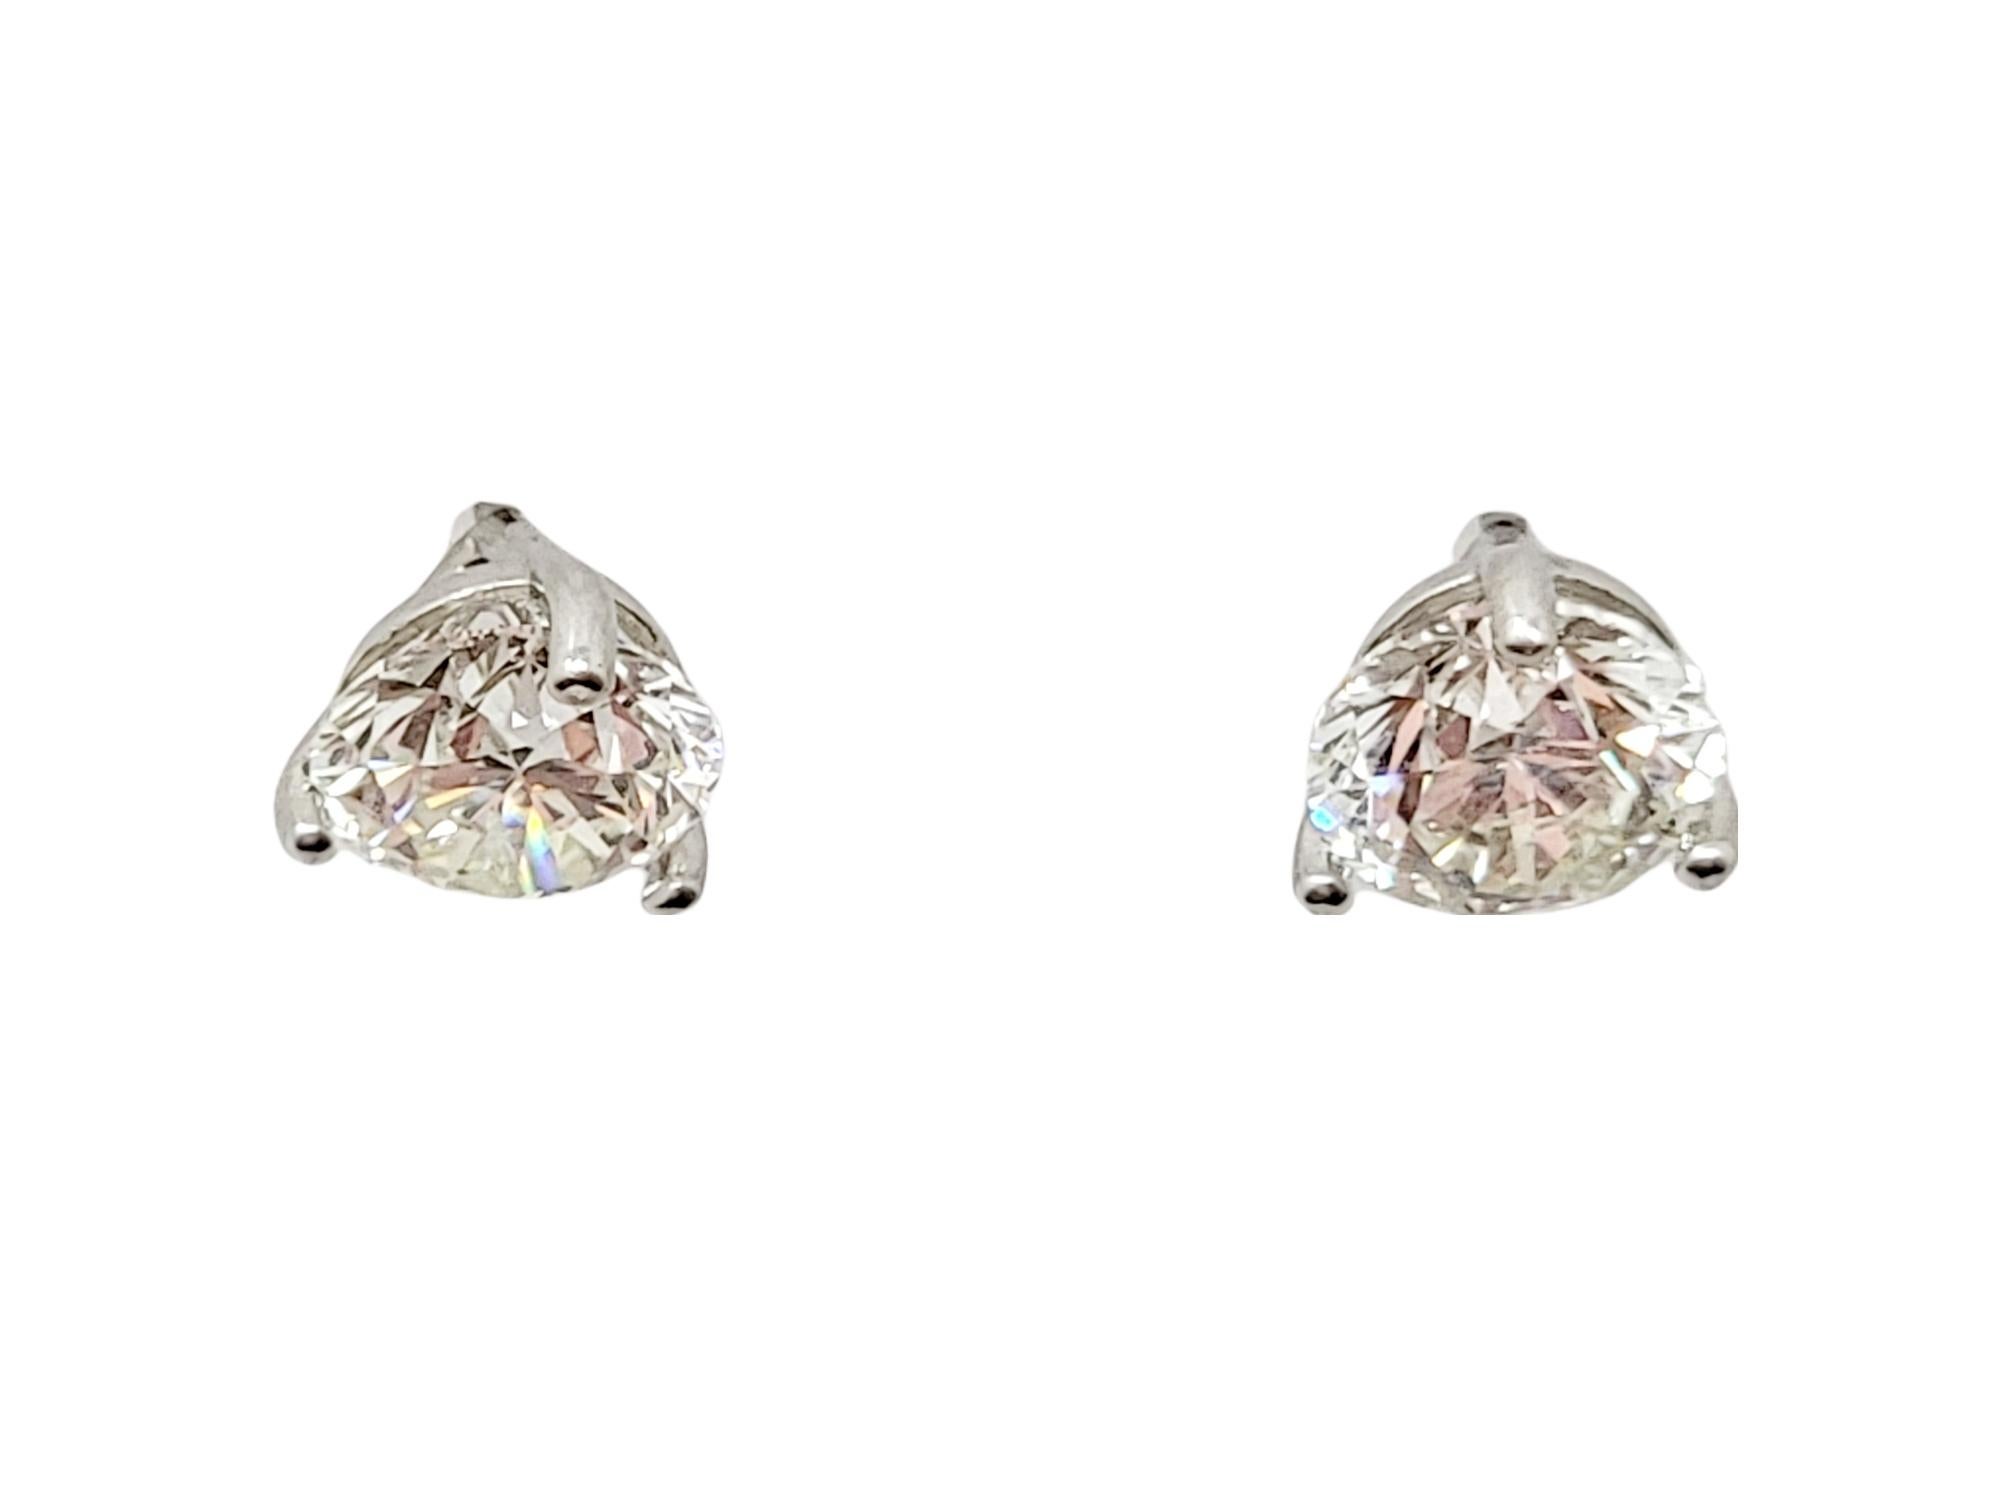 Contemporary 1.96 Carats Total Round Brilliant Solitaire Diamond Stud Earrings in White Gold For Sale